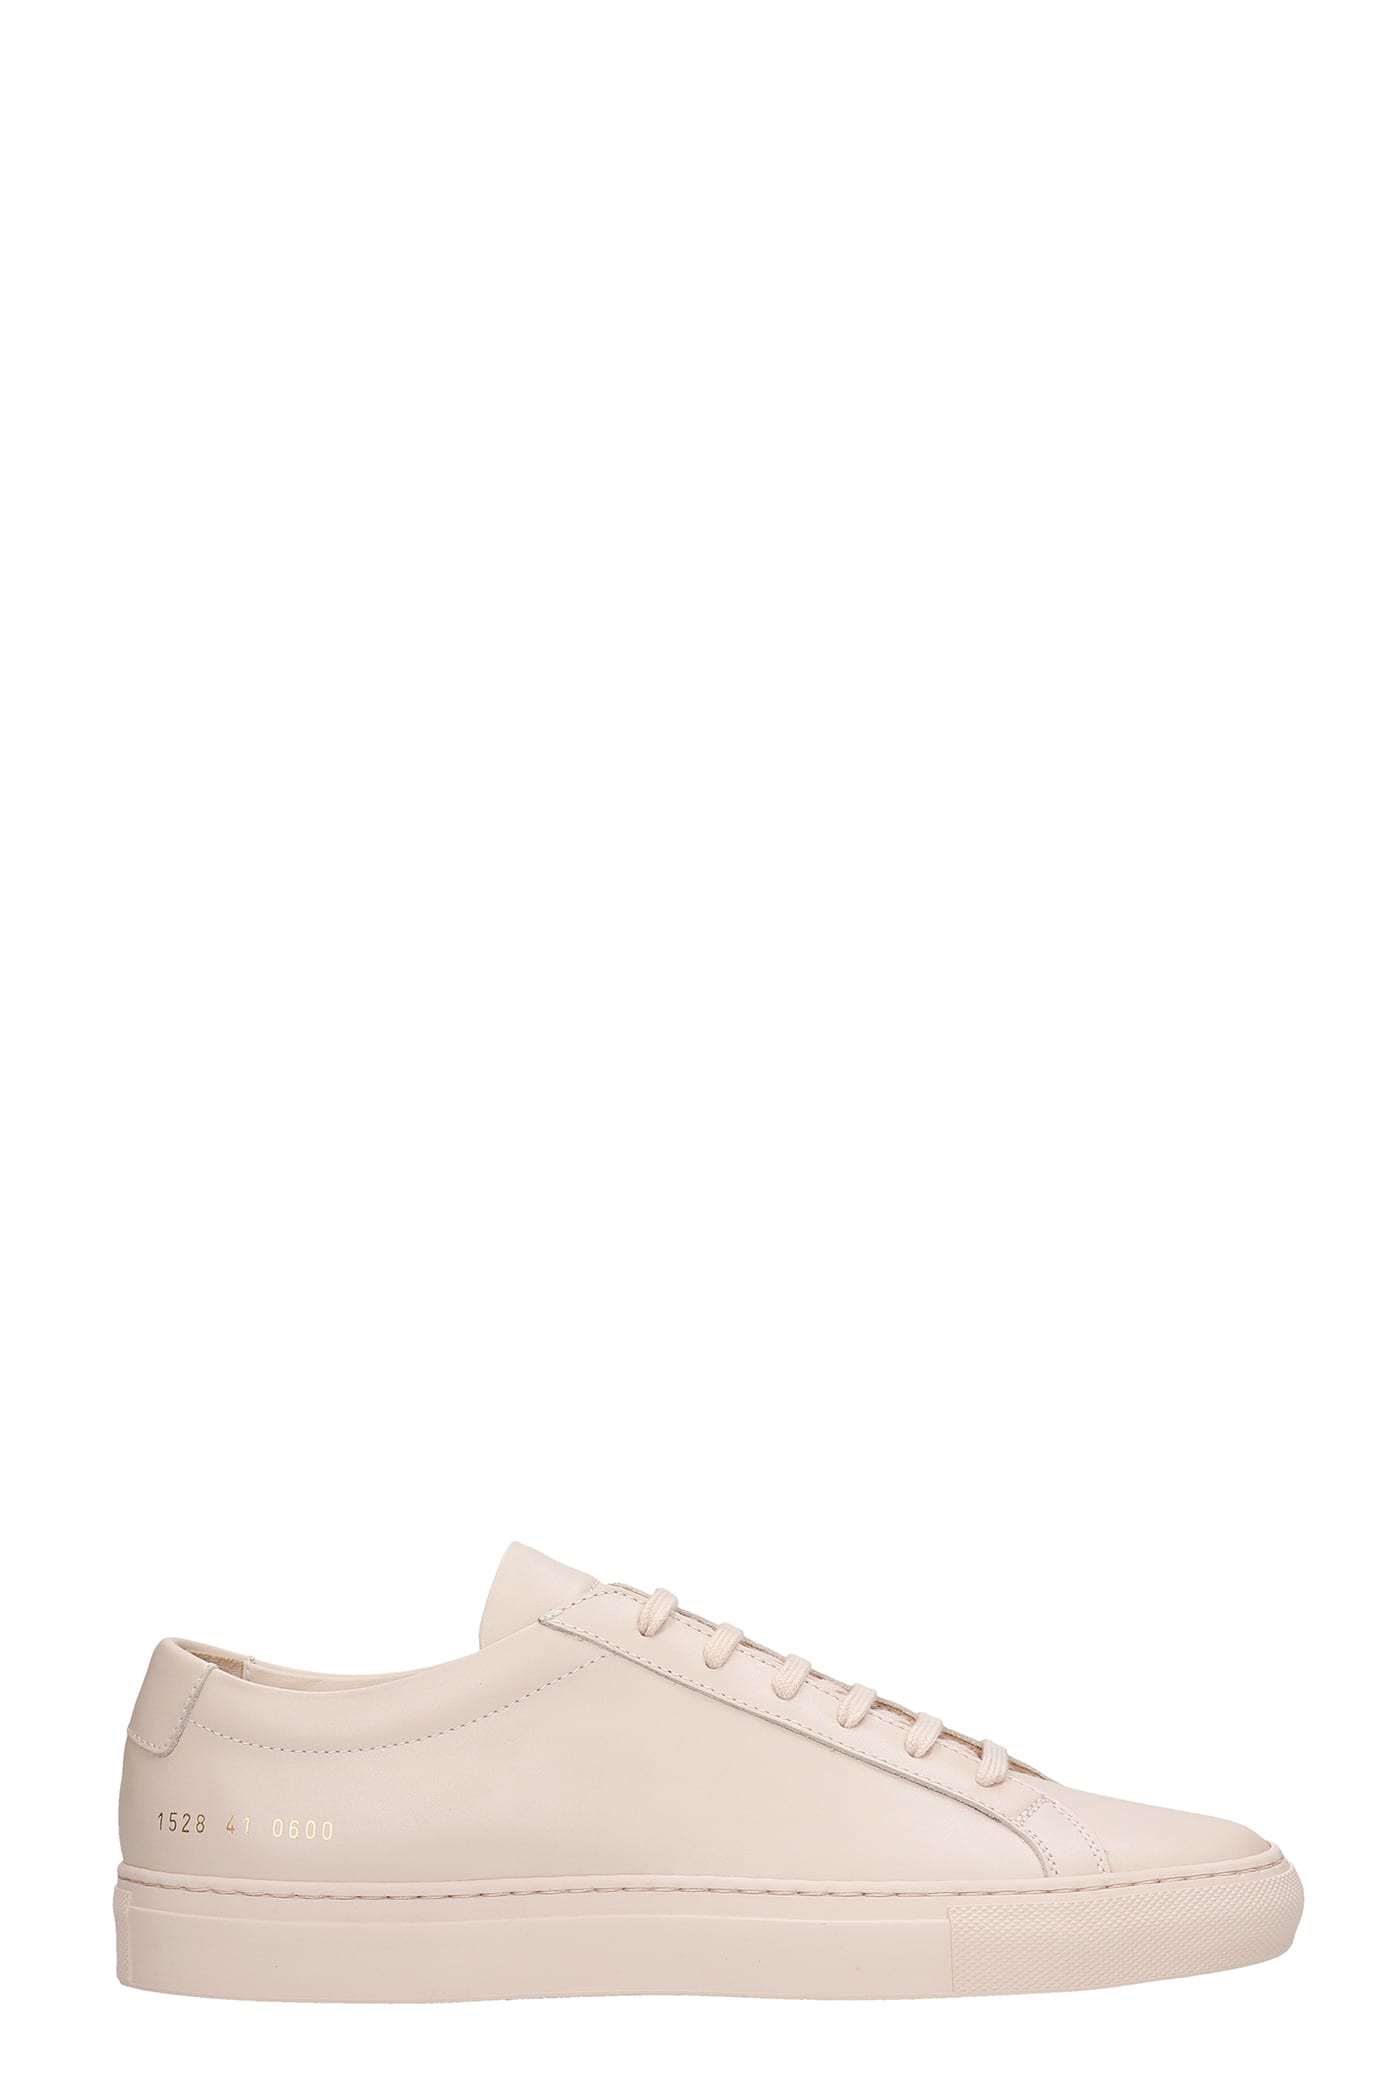 COMMON PROJECTS ORIGINAL ACHILL SNEAKERS IN POWDER LEATHER,15280600